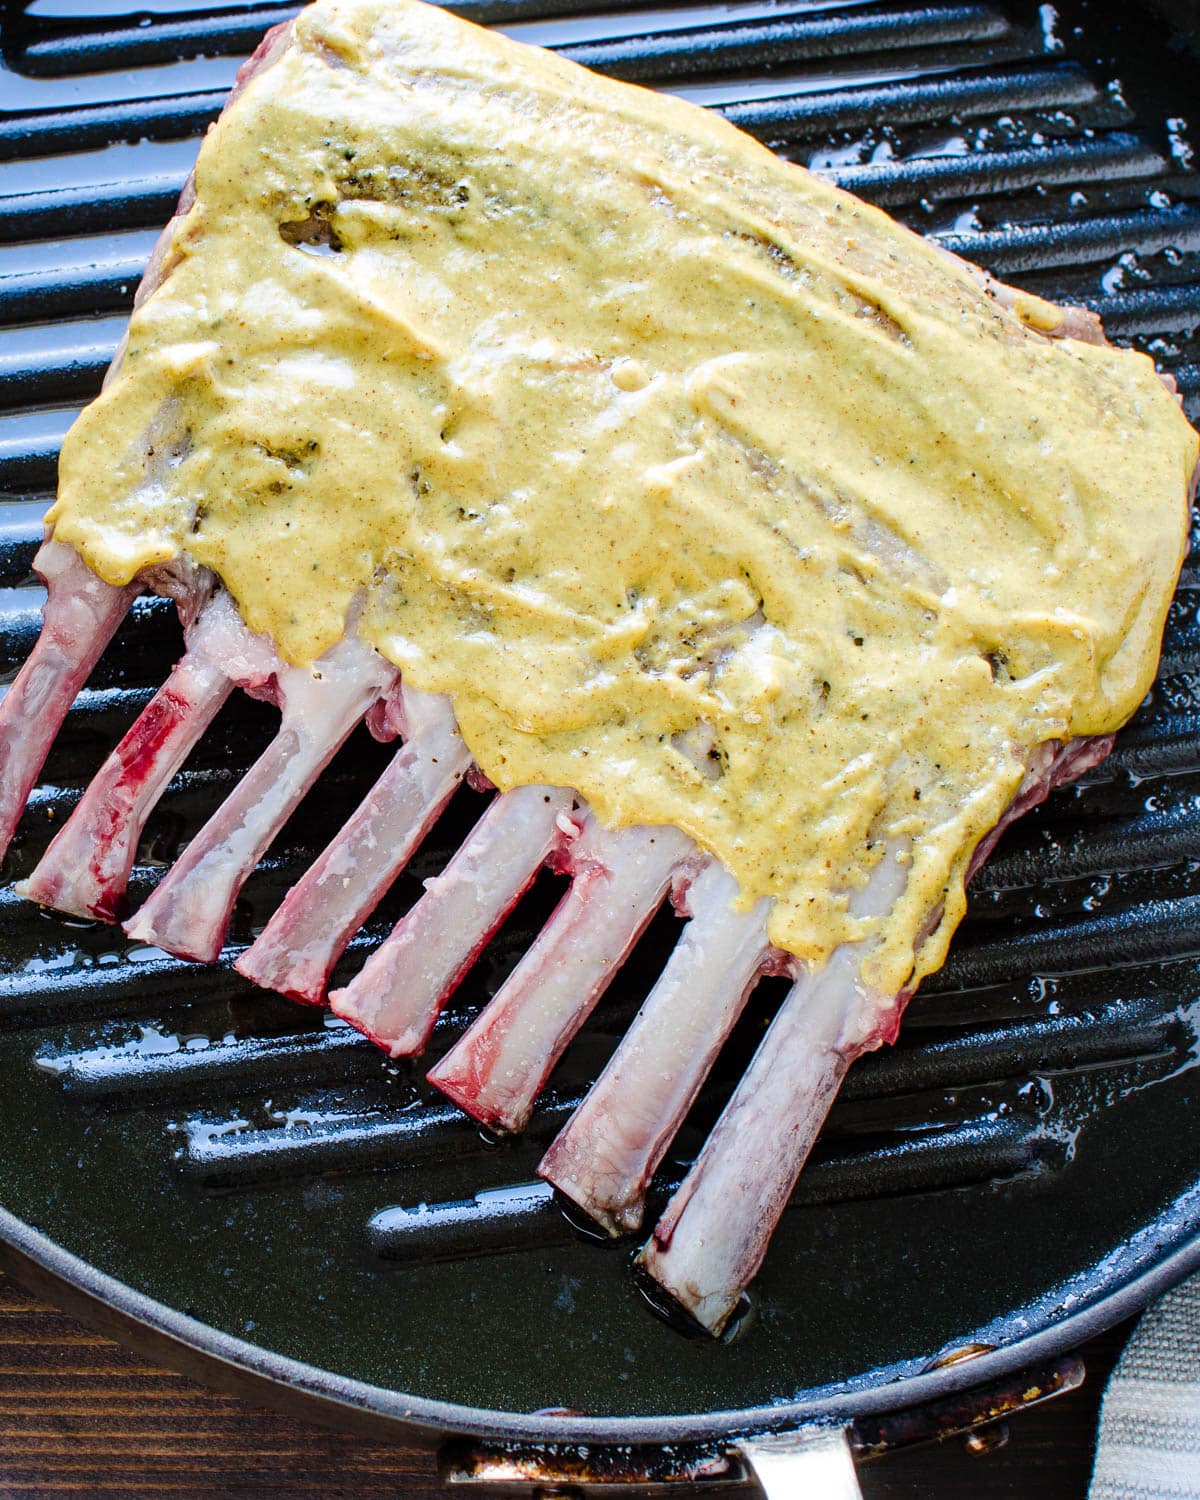 Coat the top of the rack of lamb with mustard.